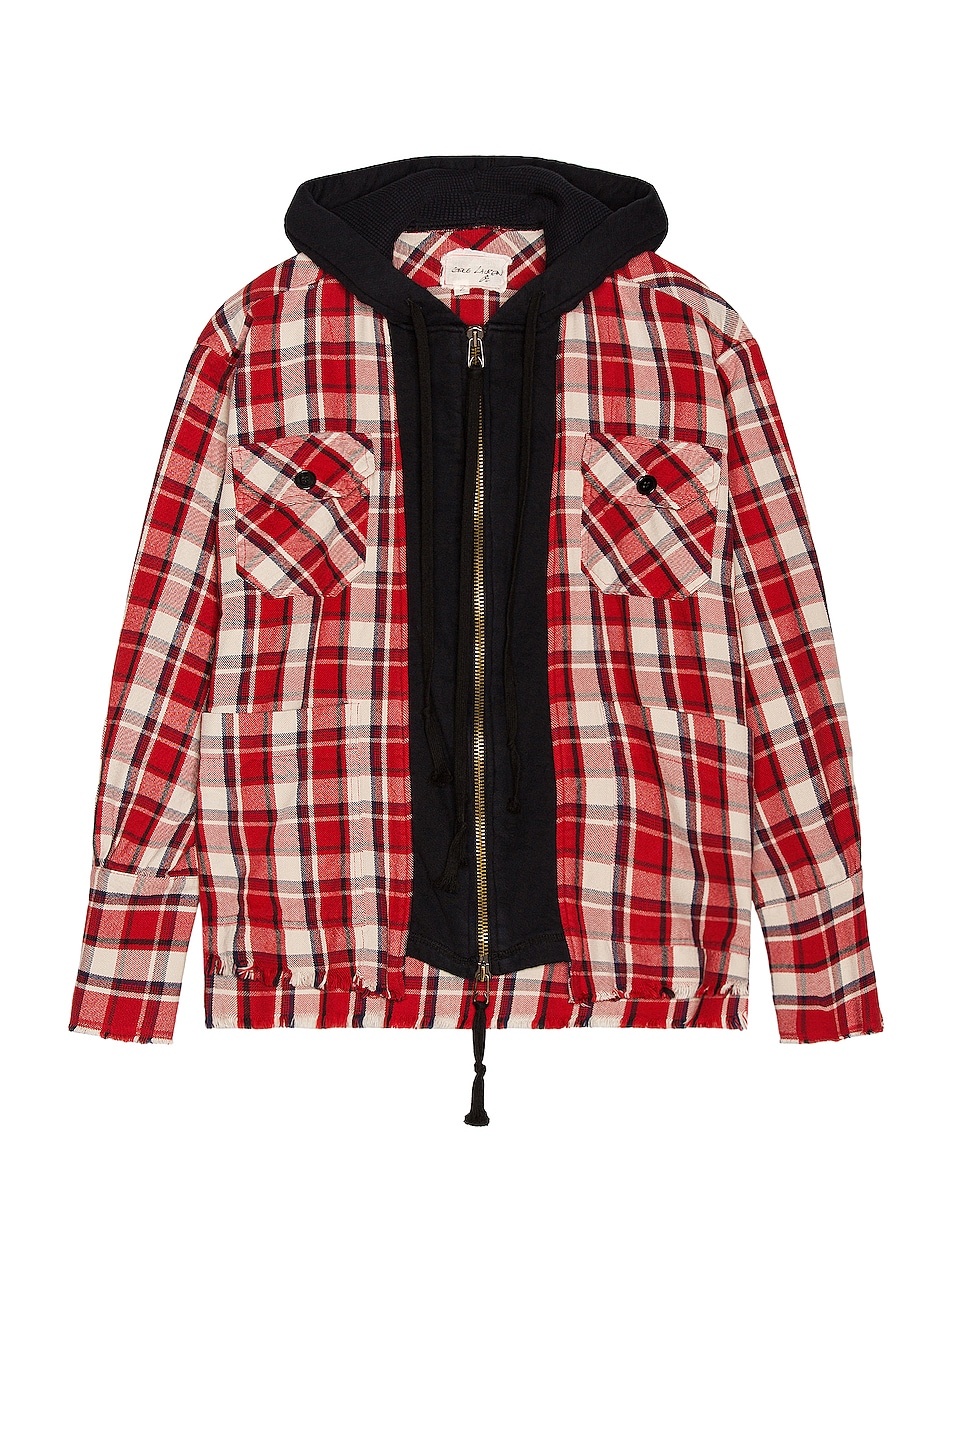 Image 1 of Greg Lauren Cherry Hoodie Front Boxy Shirt in Red Plaid